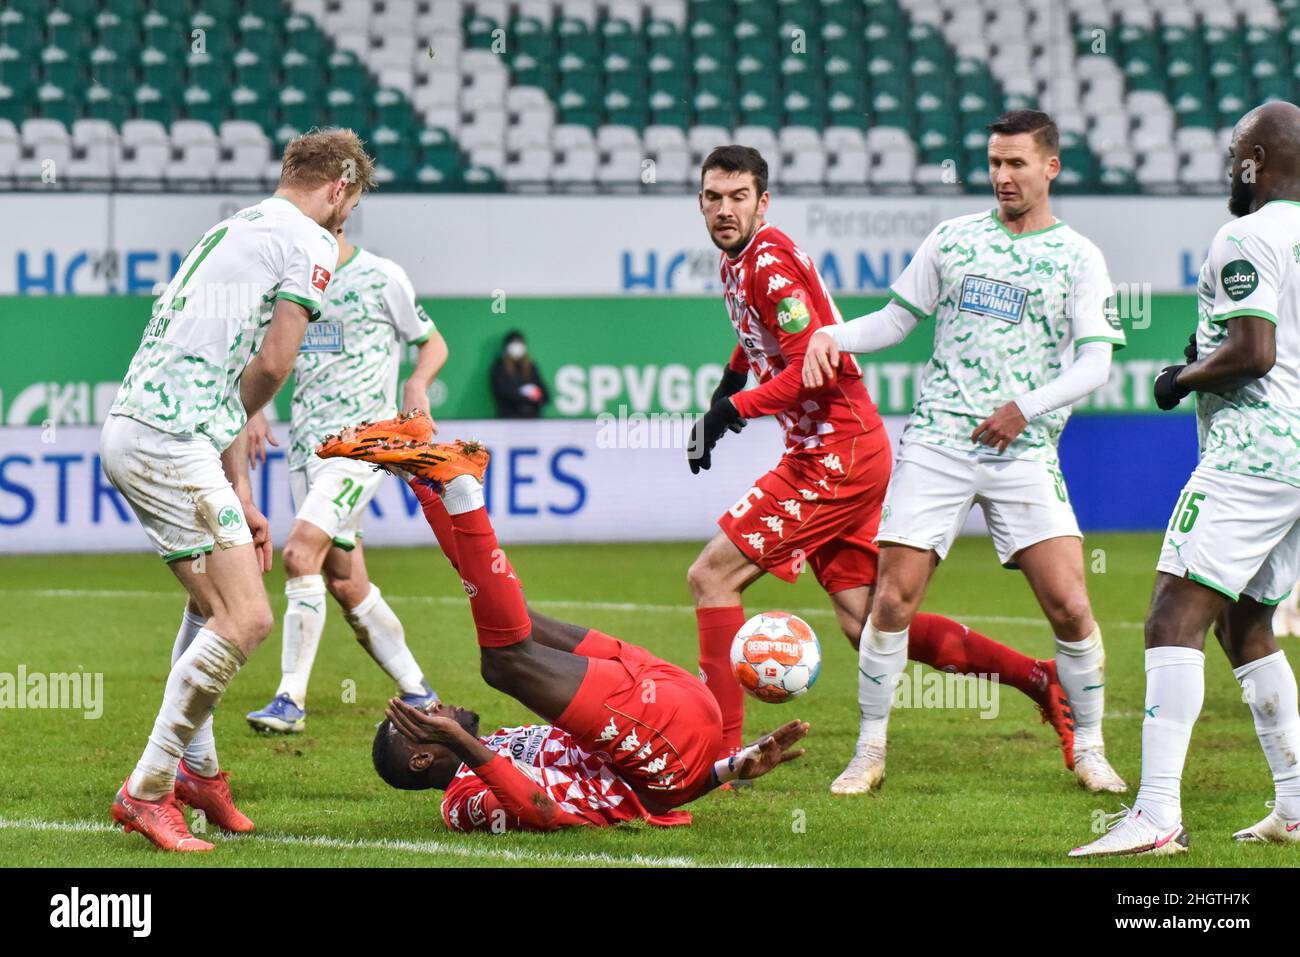 Germany ,Fuerth, Sportpark Ronhof Thomas Sommer - 22 Jan 2022 - Fussball, 1.Bundesliga - SpVgg Greuther Fuerth vs. FSV Mainz 05  Image: (fLTR) Sebastian Griesbeck (SpVgg Greuther Fürth,22) defending Moussa Niakhate (Mainz, 19) as he attempts a dangerous bicycle kick inside the box.  DFL regulations prohibit any use of photographs as image sequences and or quasi-video Stock Photo